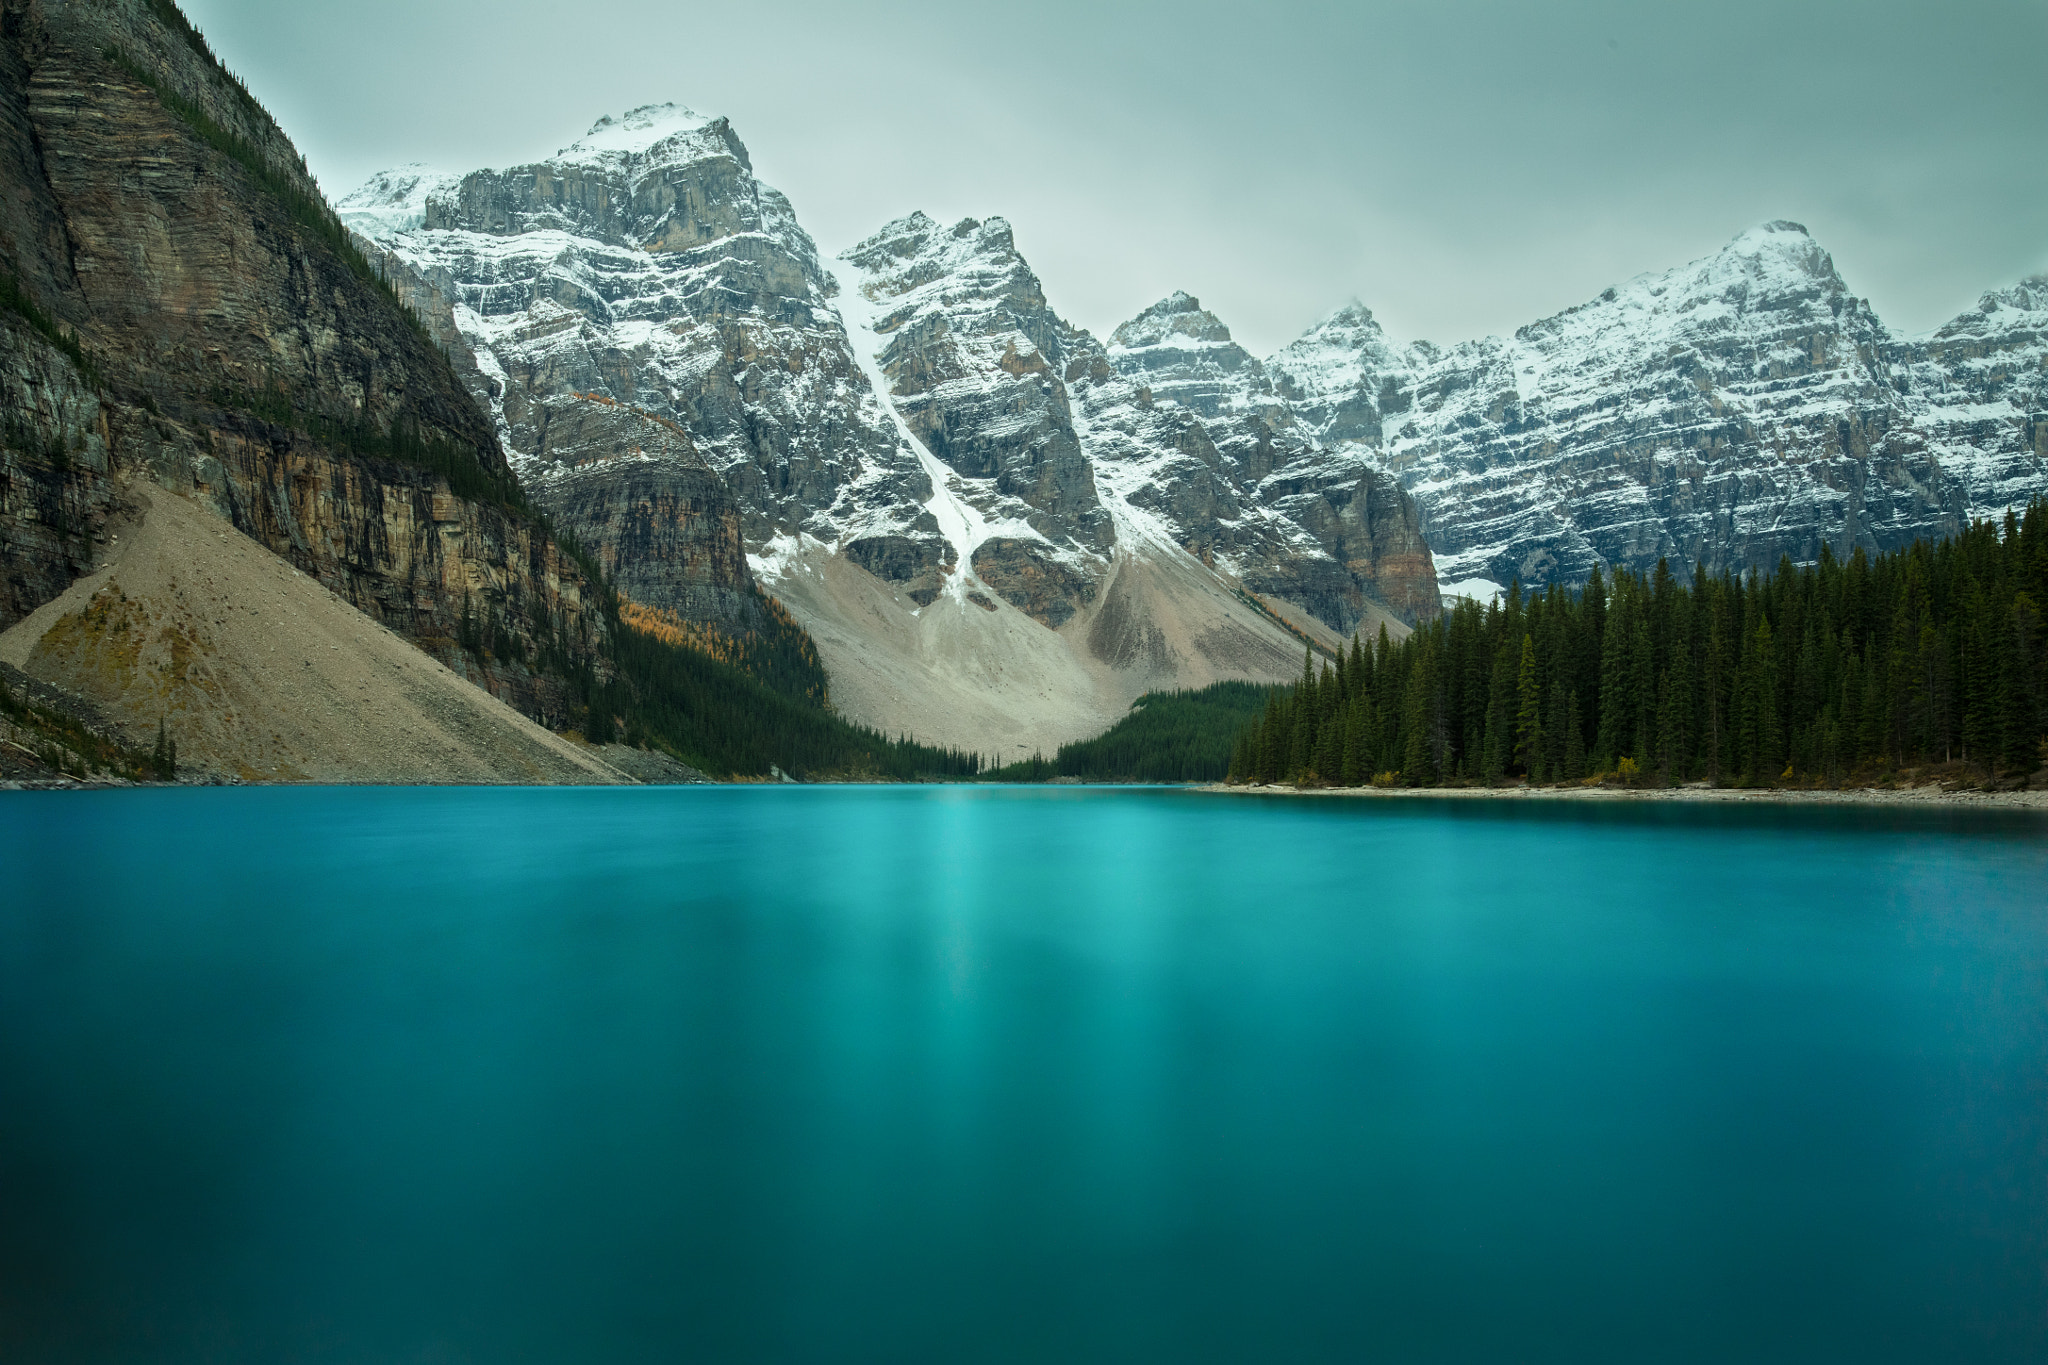 ZEISS Otus 28mm F1.4 sample photo. Moraine lake near banff is iconic, now i know why. photography